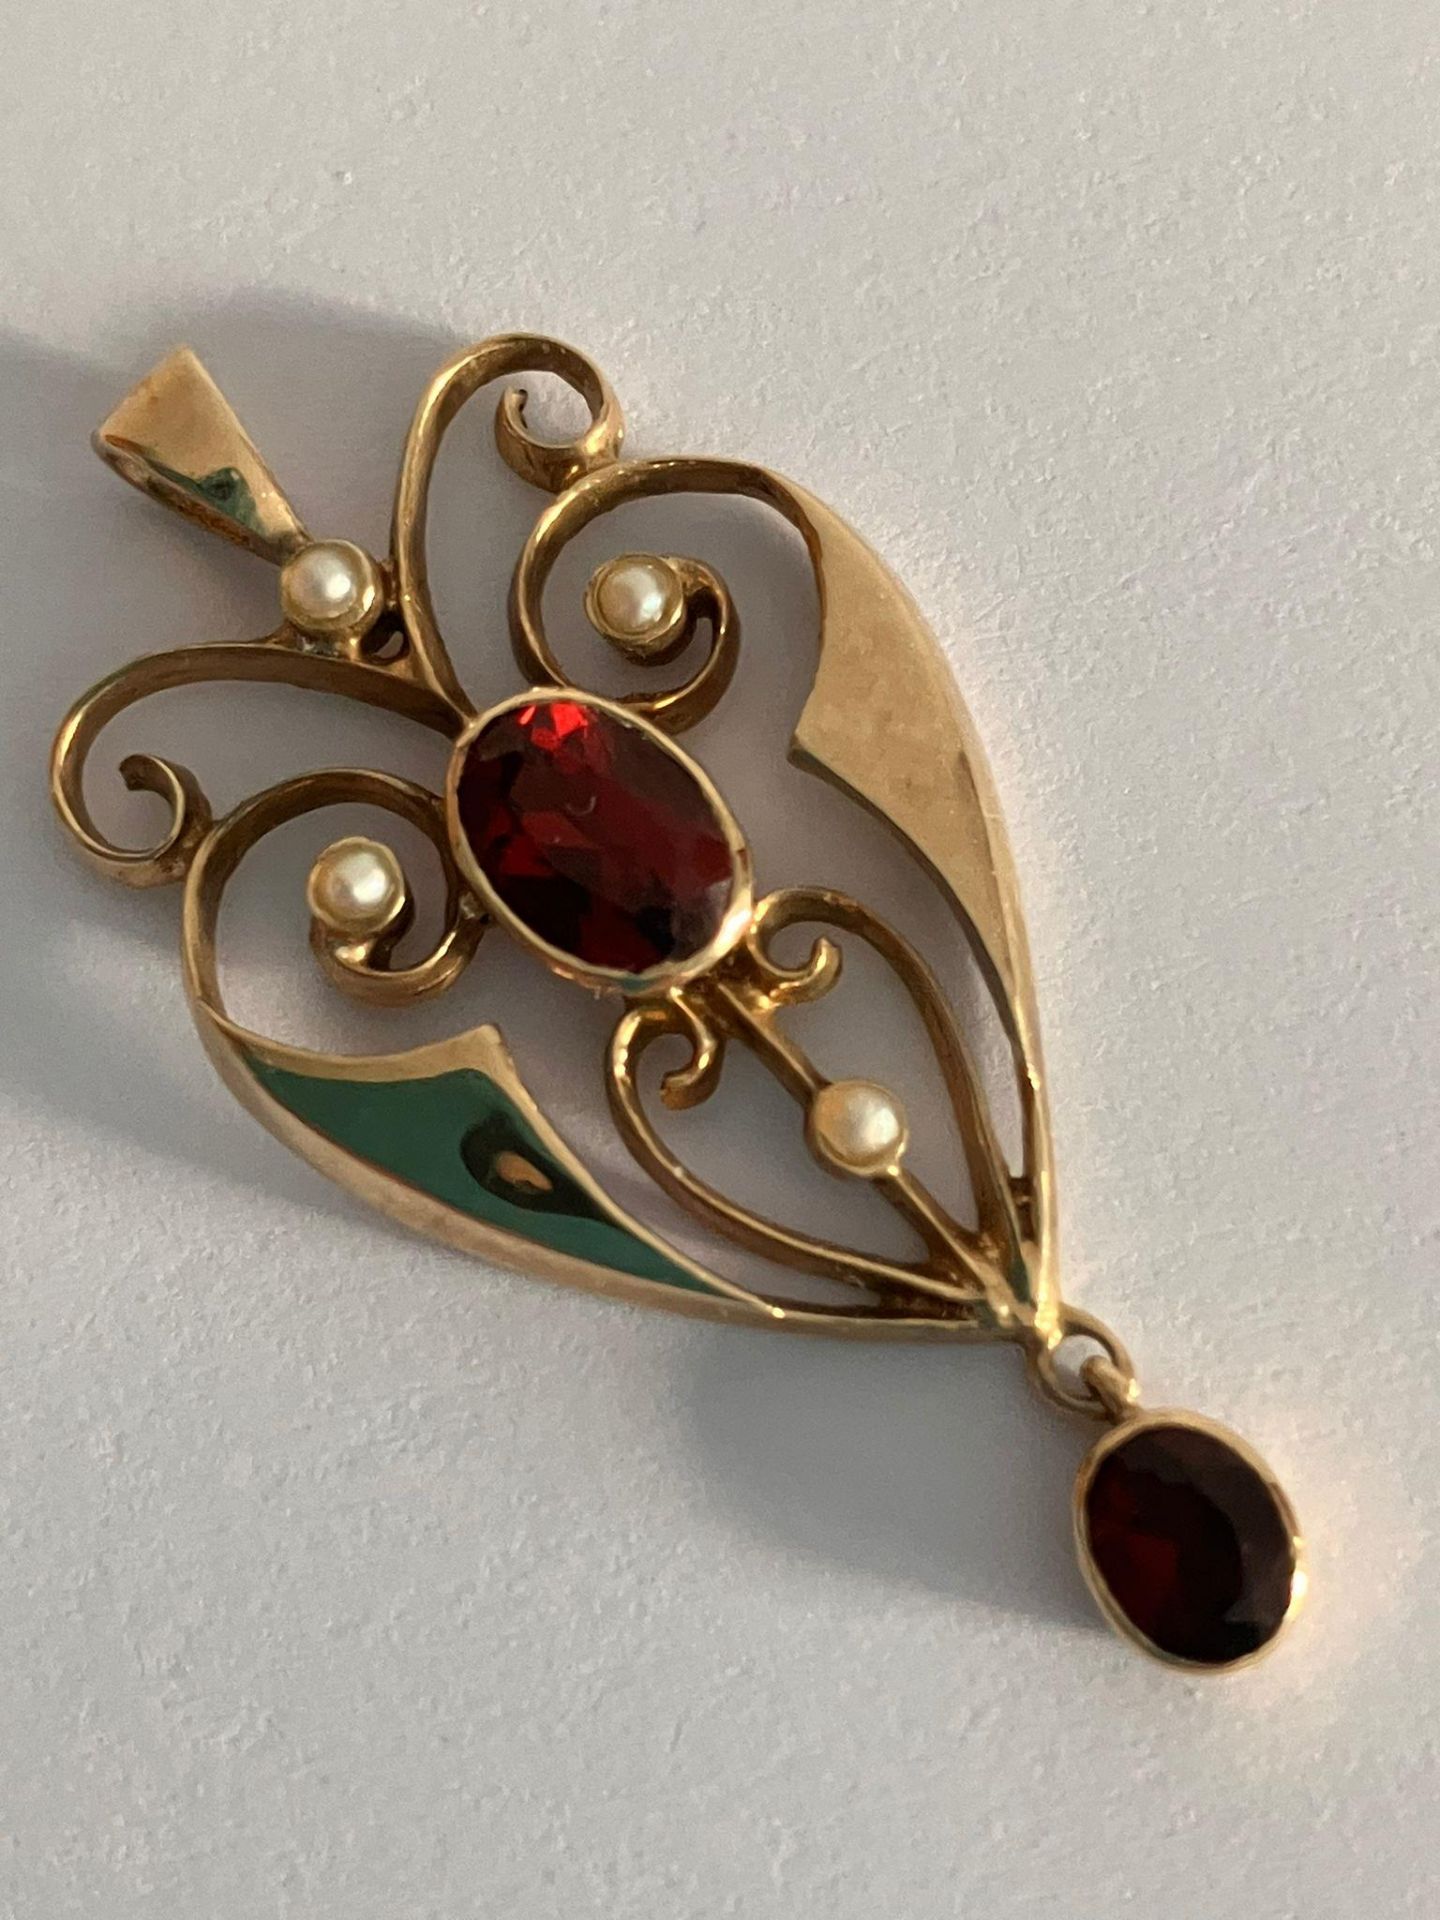 Vintage Victorian style 9 carat GOLD PENDANT, decorated with GARNETS and SEED PEARLS. 3.1 grams.